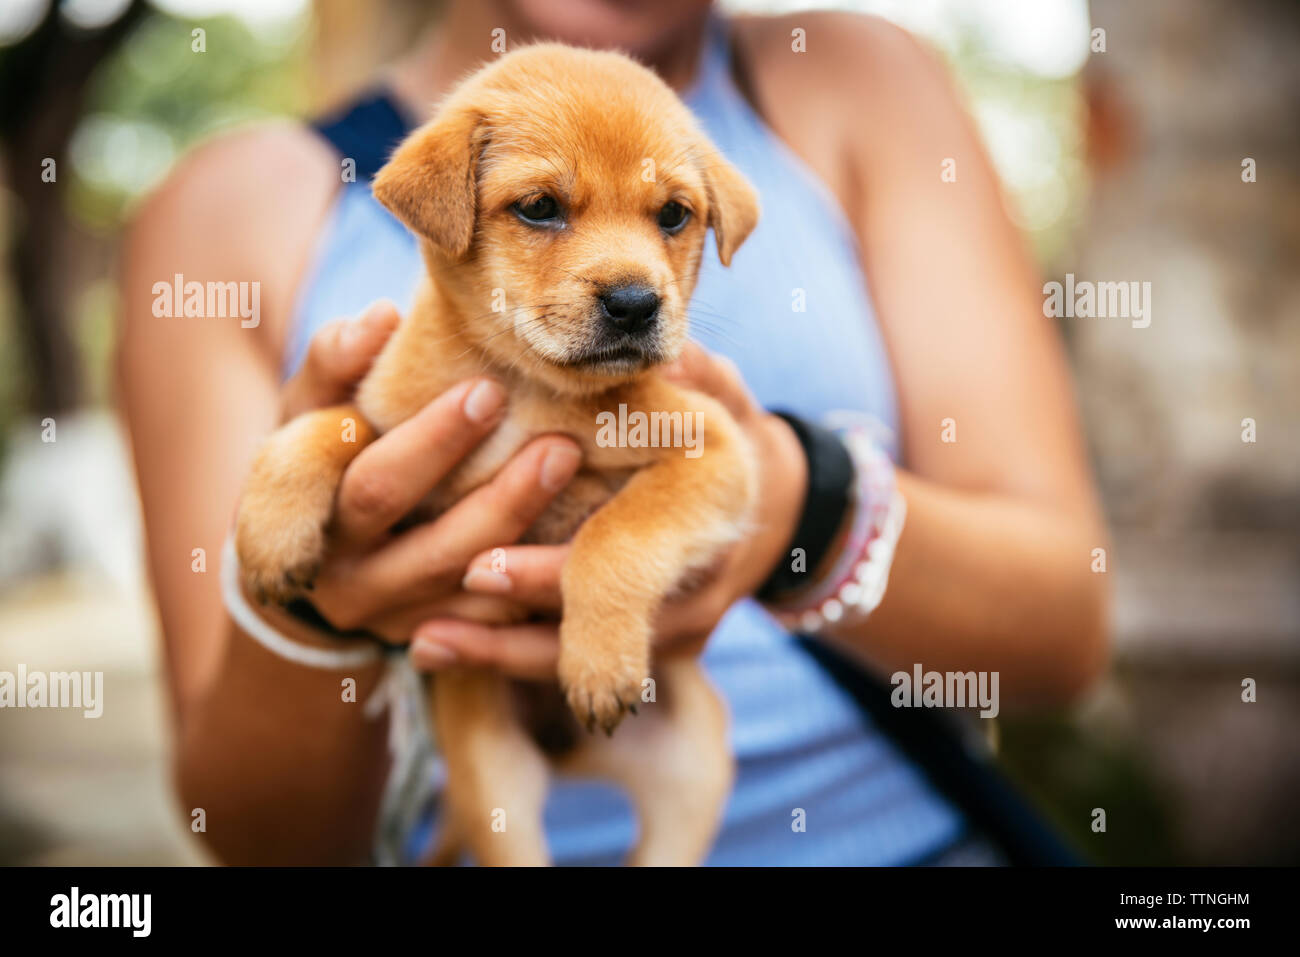 Midsection of woman holding puppy Banque D'Images